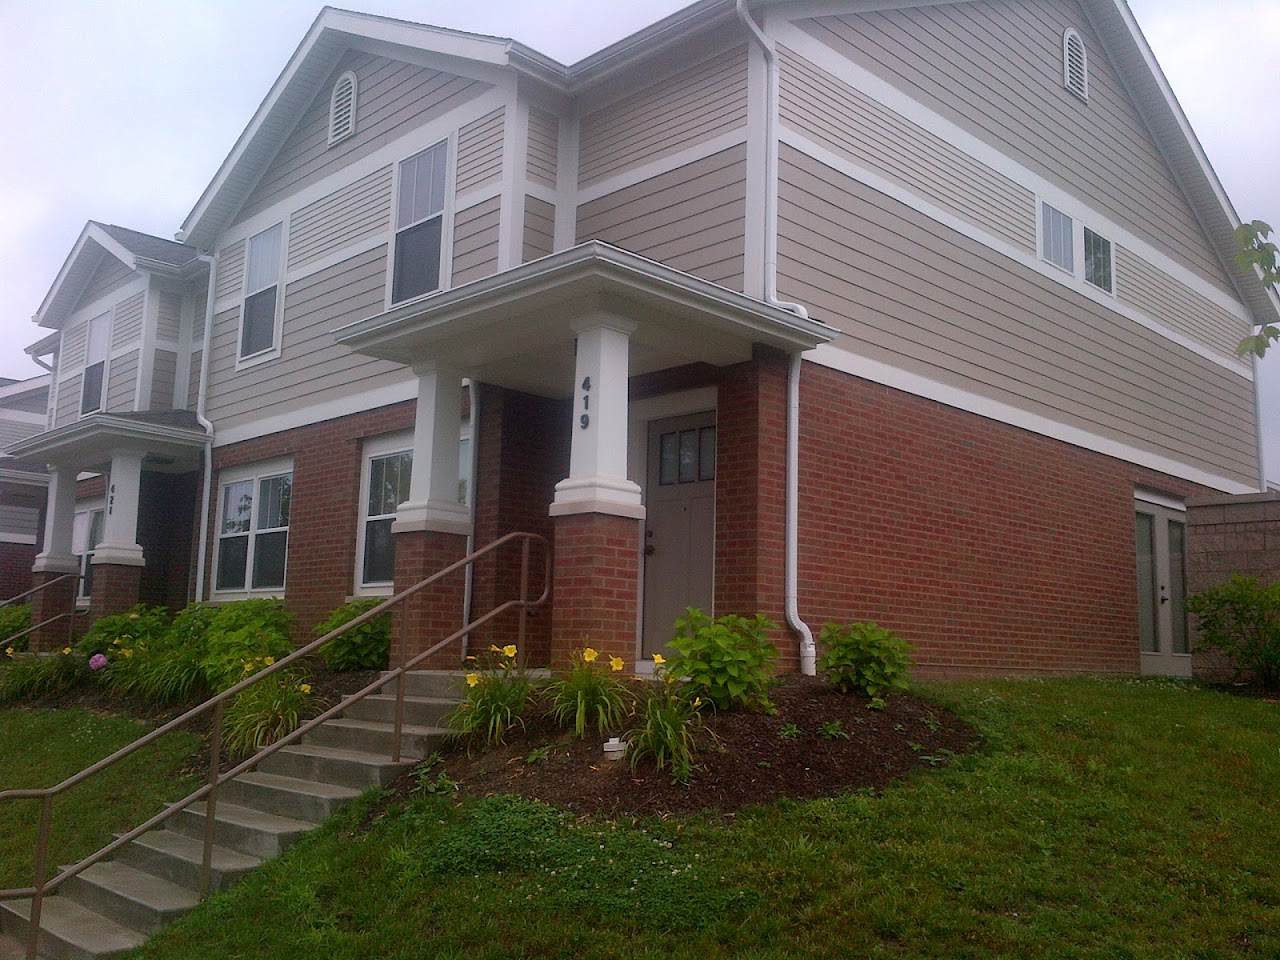 Photo of EDGEWOOD VILLAGE V. Affordable housing located at 491 VERNON ODOM BLVD AKRON, OH 44307